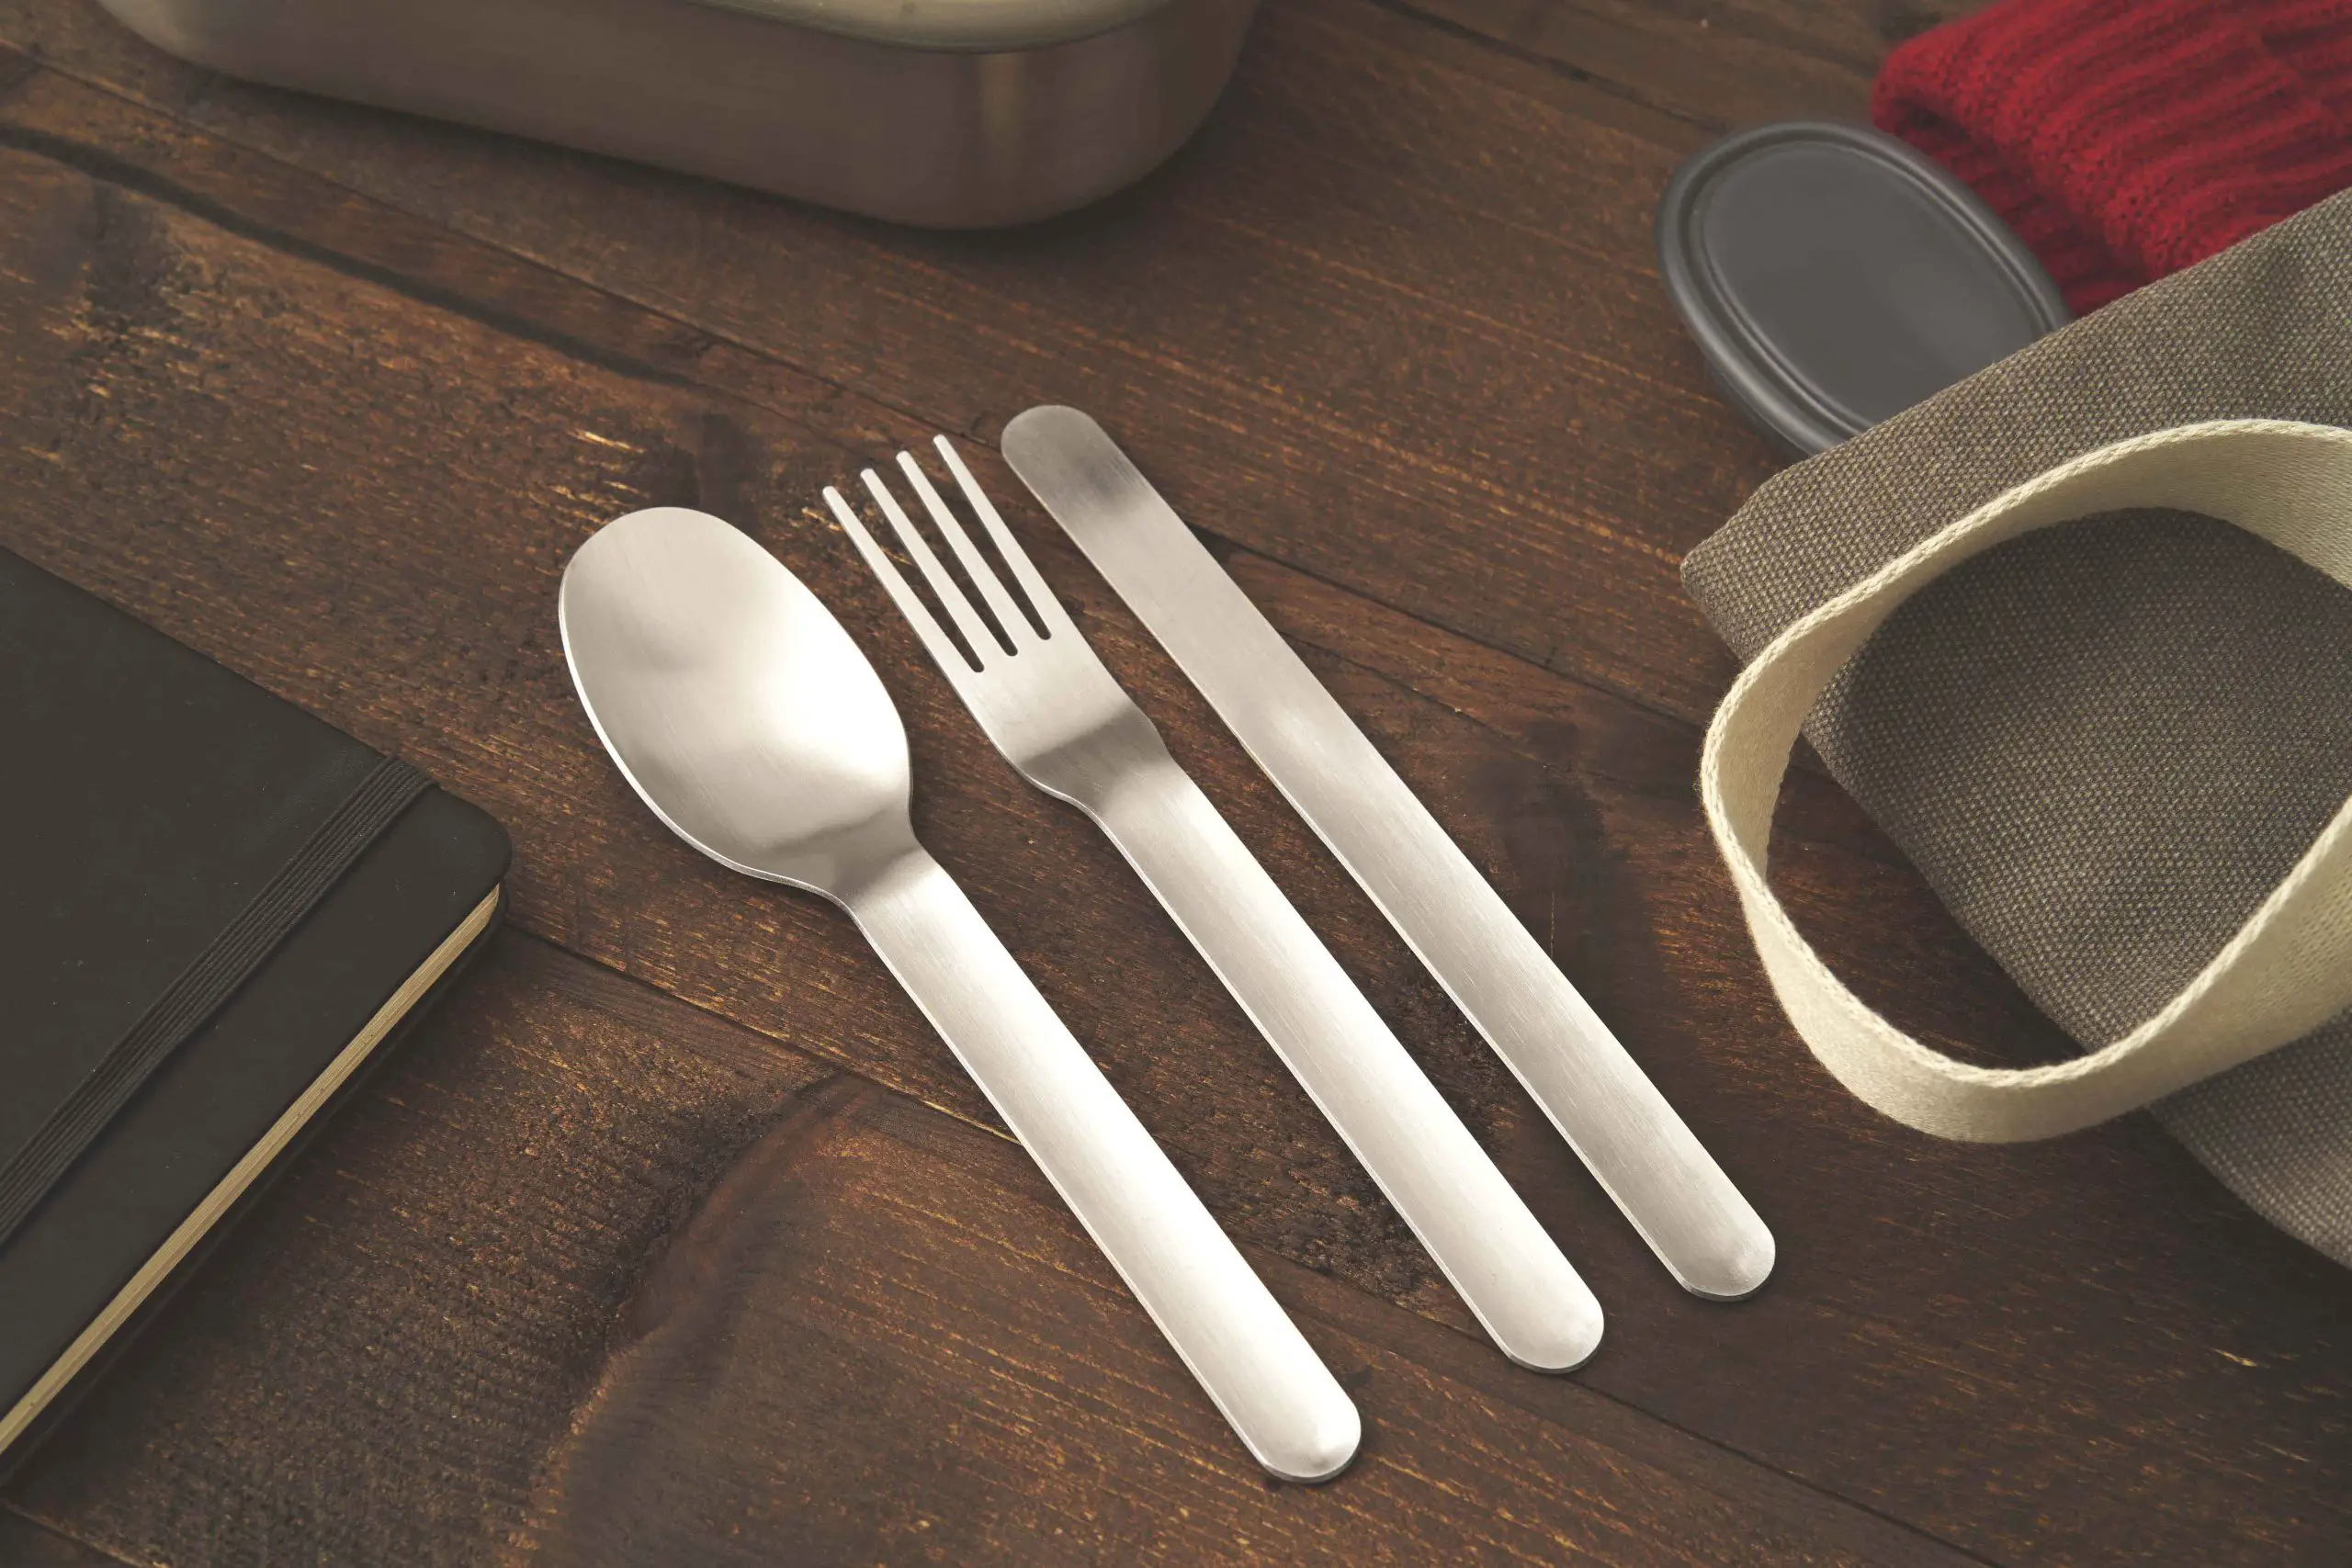 https://www.greenerlyfe.com/wp-content/uploads/2020/10/stainless-steel-travel-cutlery-set-table-scaled.jpg